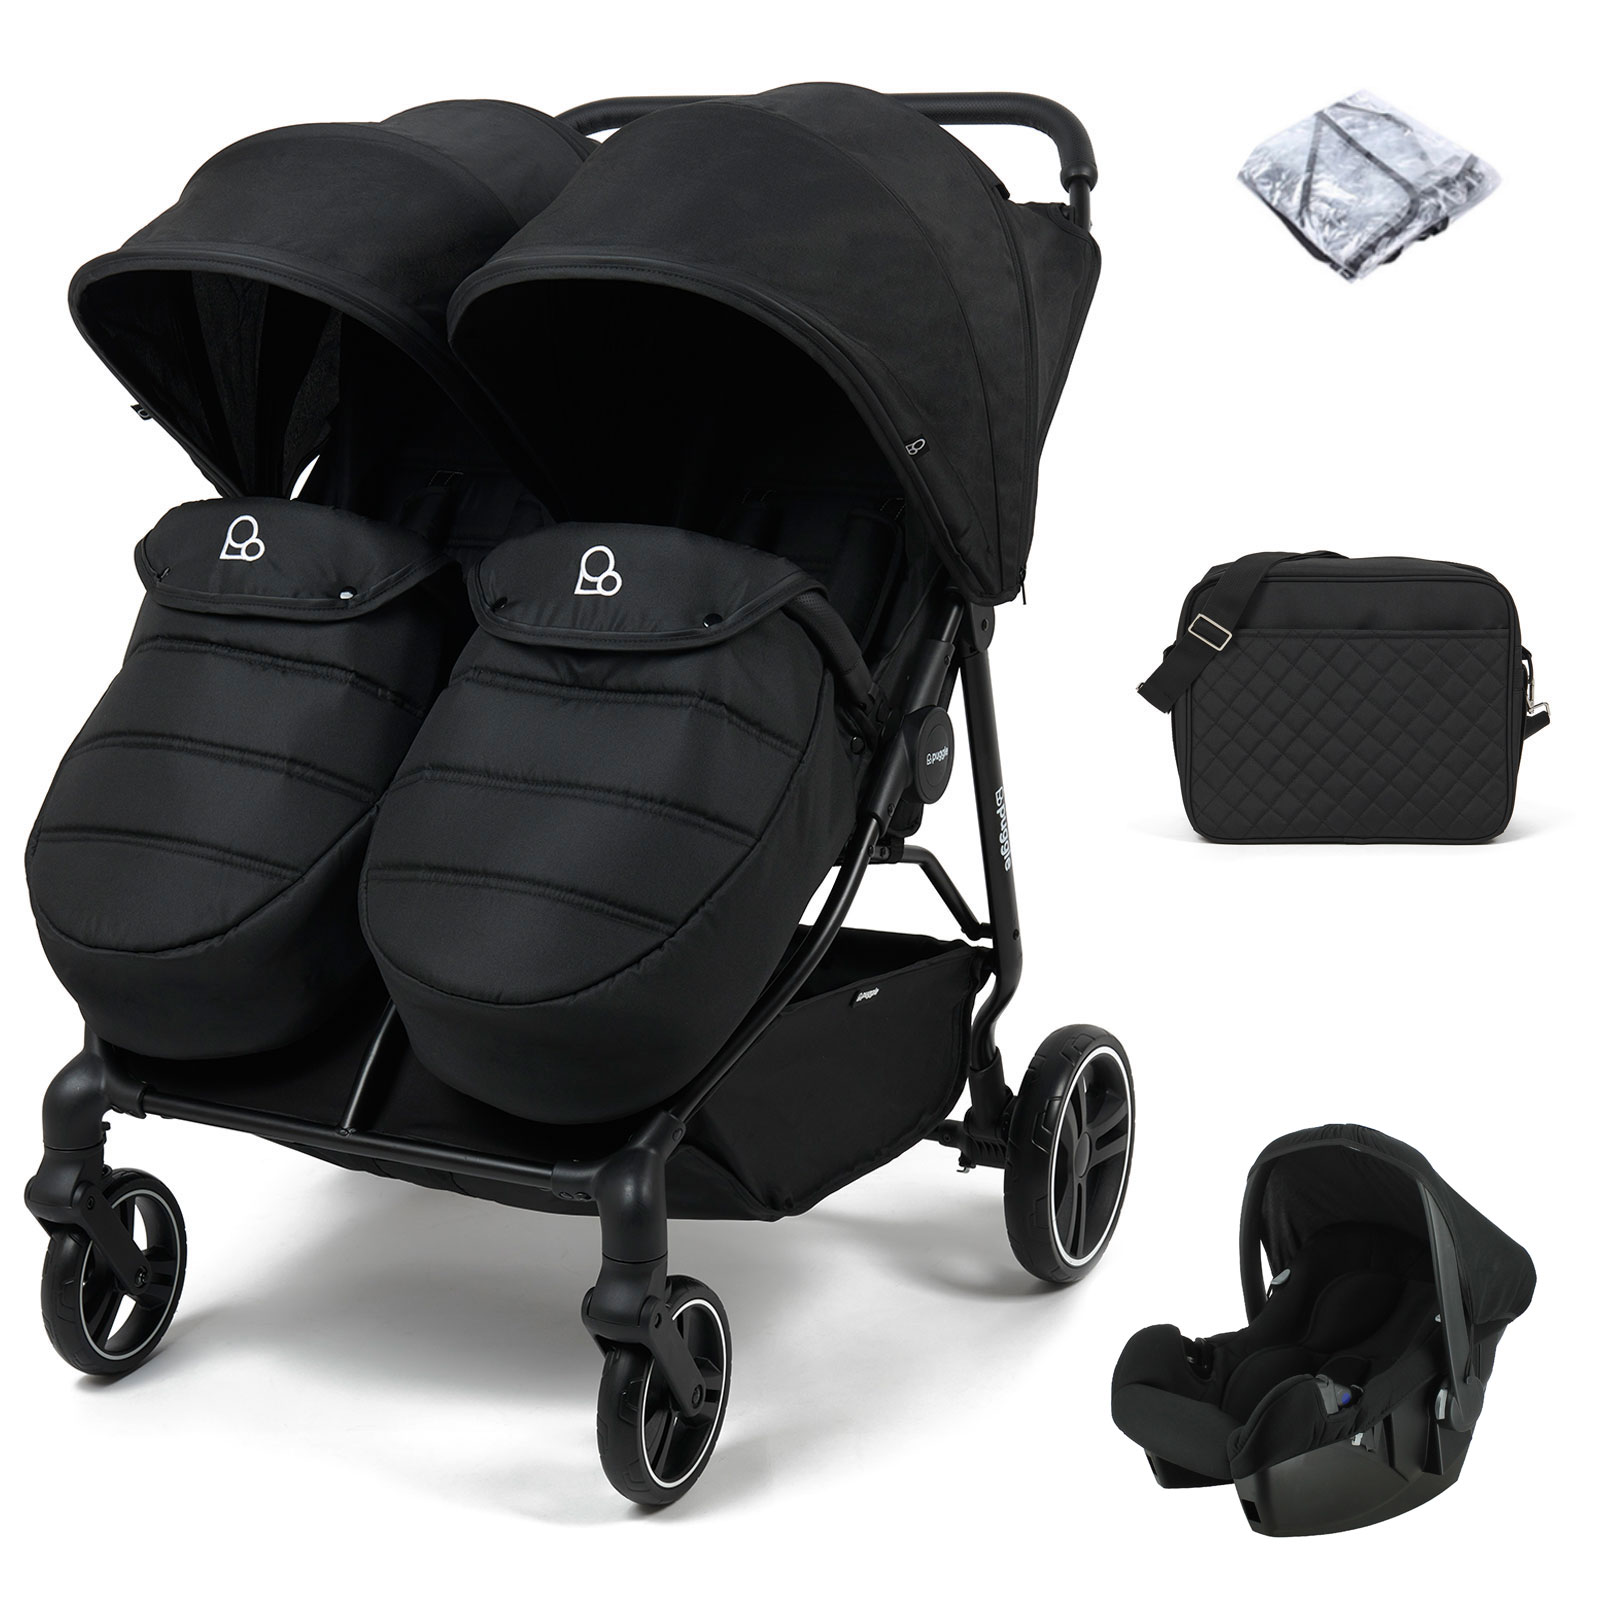 Puggle Urban City Easyfold Twin Pushchair with Footmuffs, Beone Car Seat & Changing Bag - Storm Black